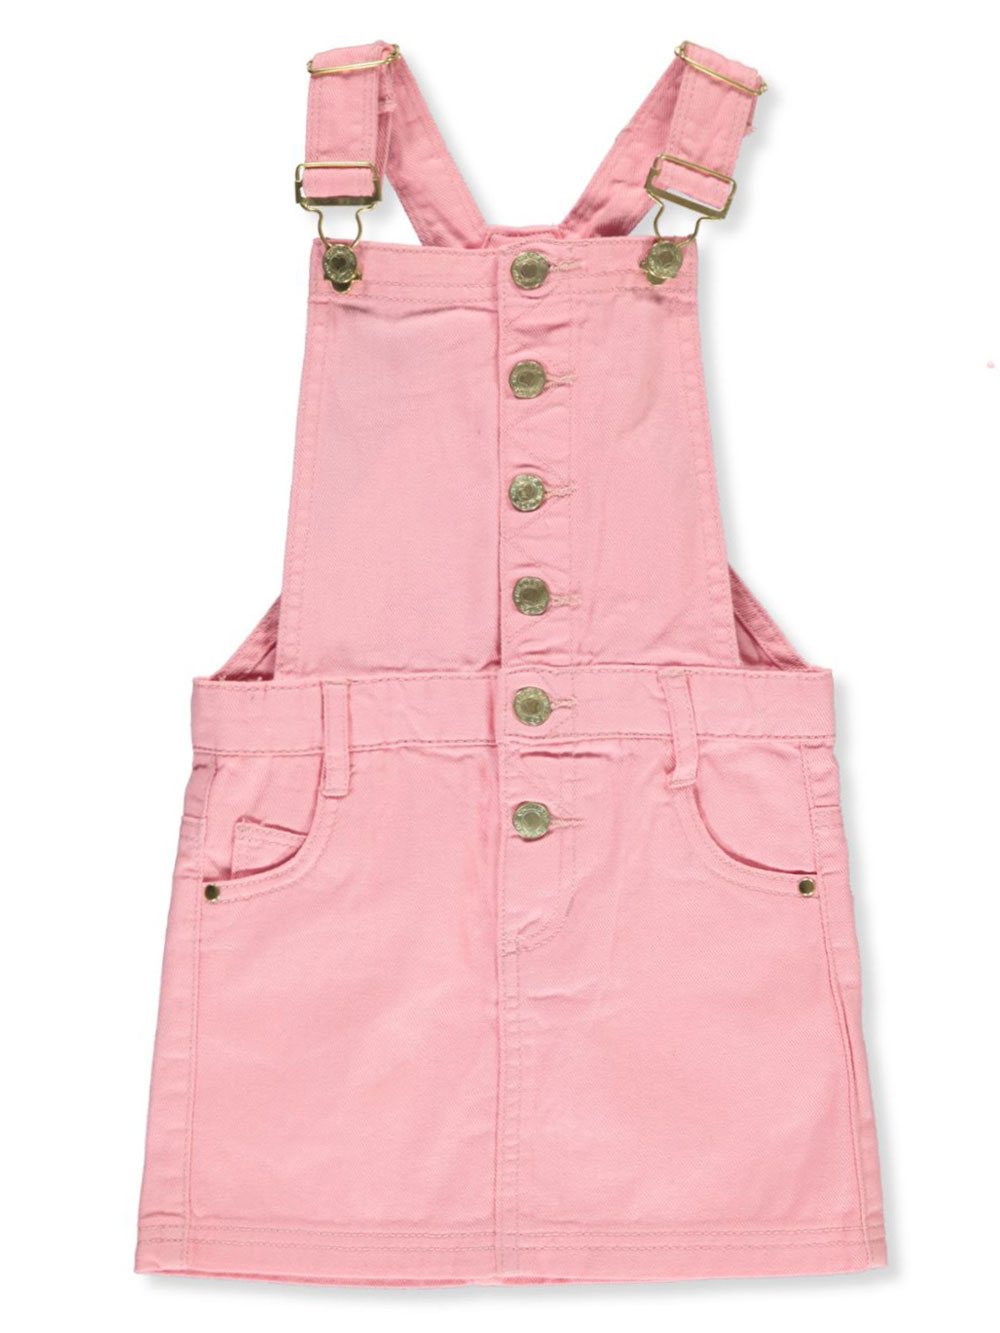 Size 5 Overalls Jumpers for Girls